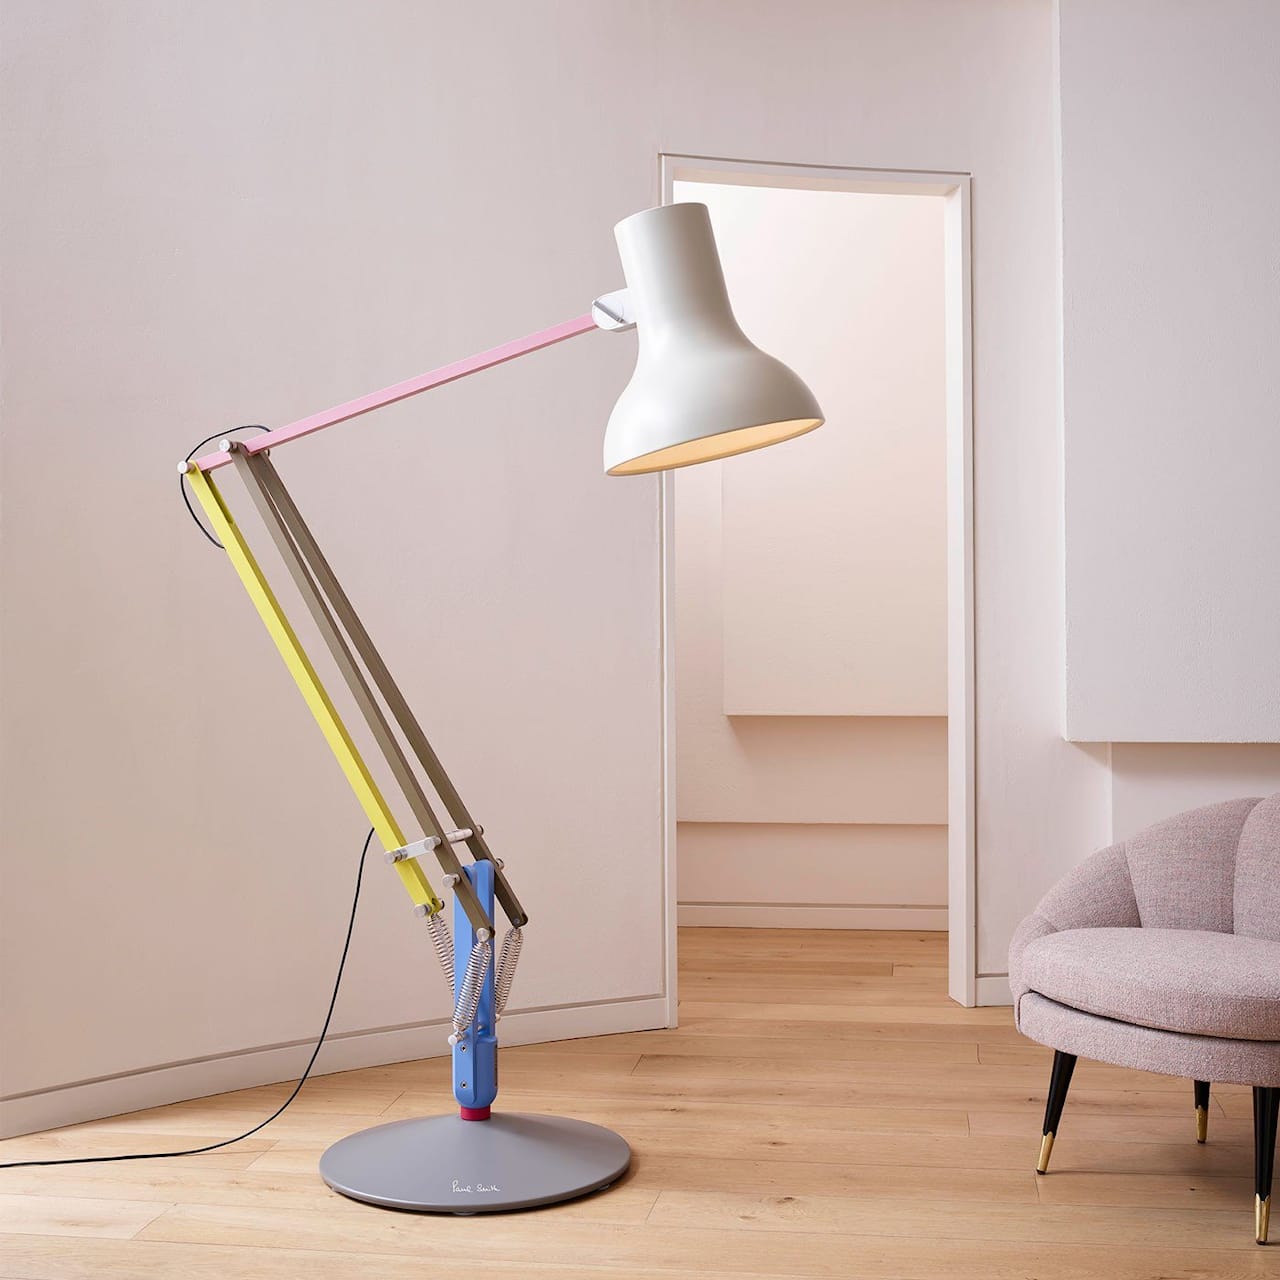 Type 75 Giant Anglepoise + Paul Smith Edition One